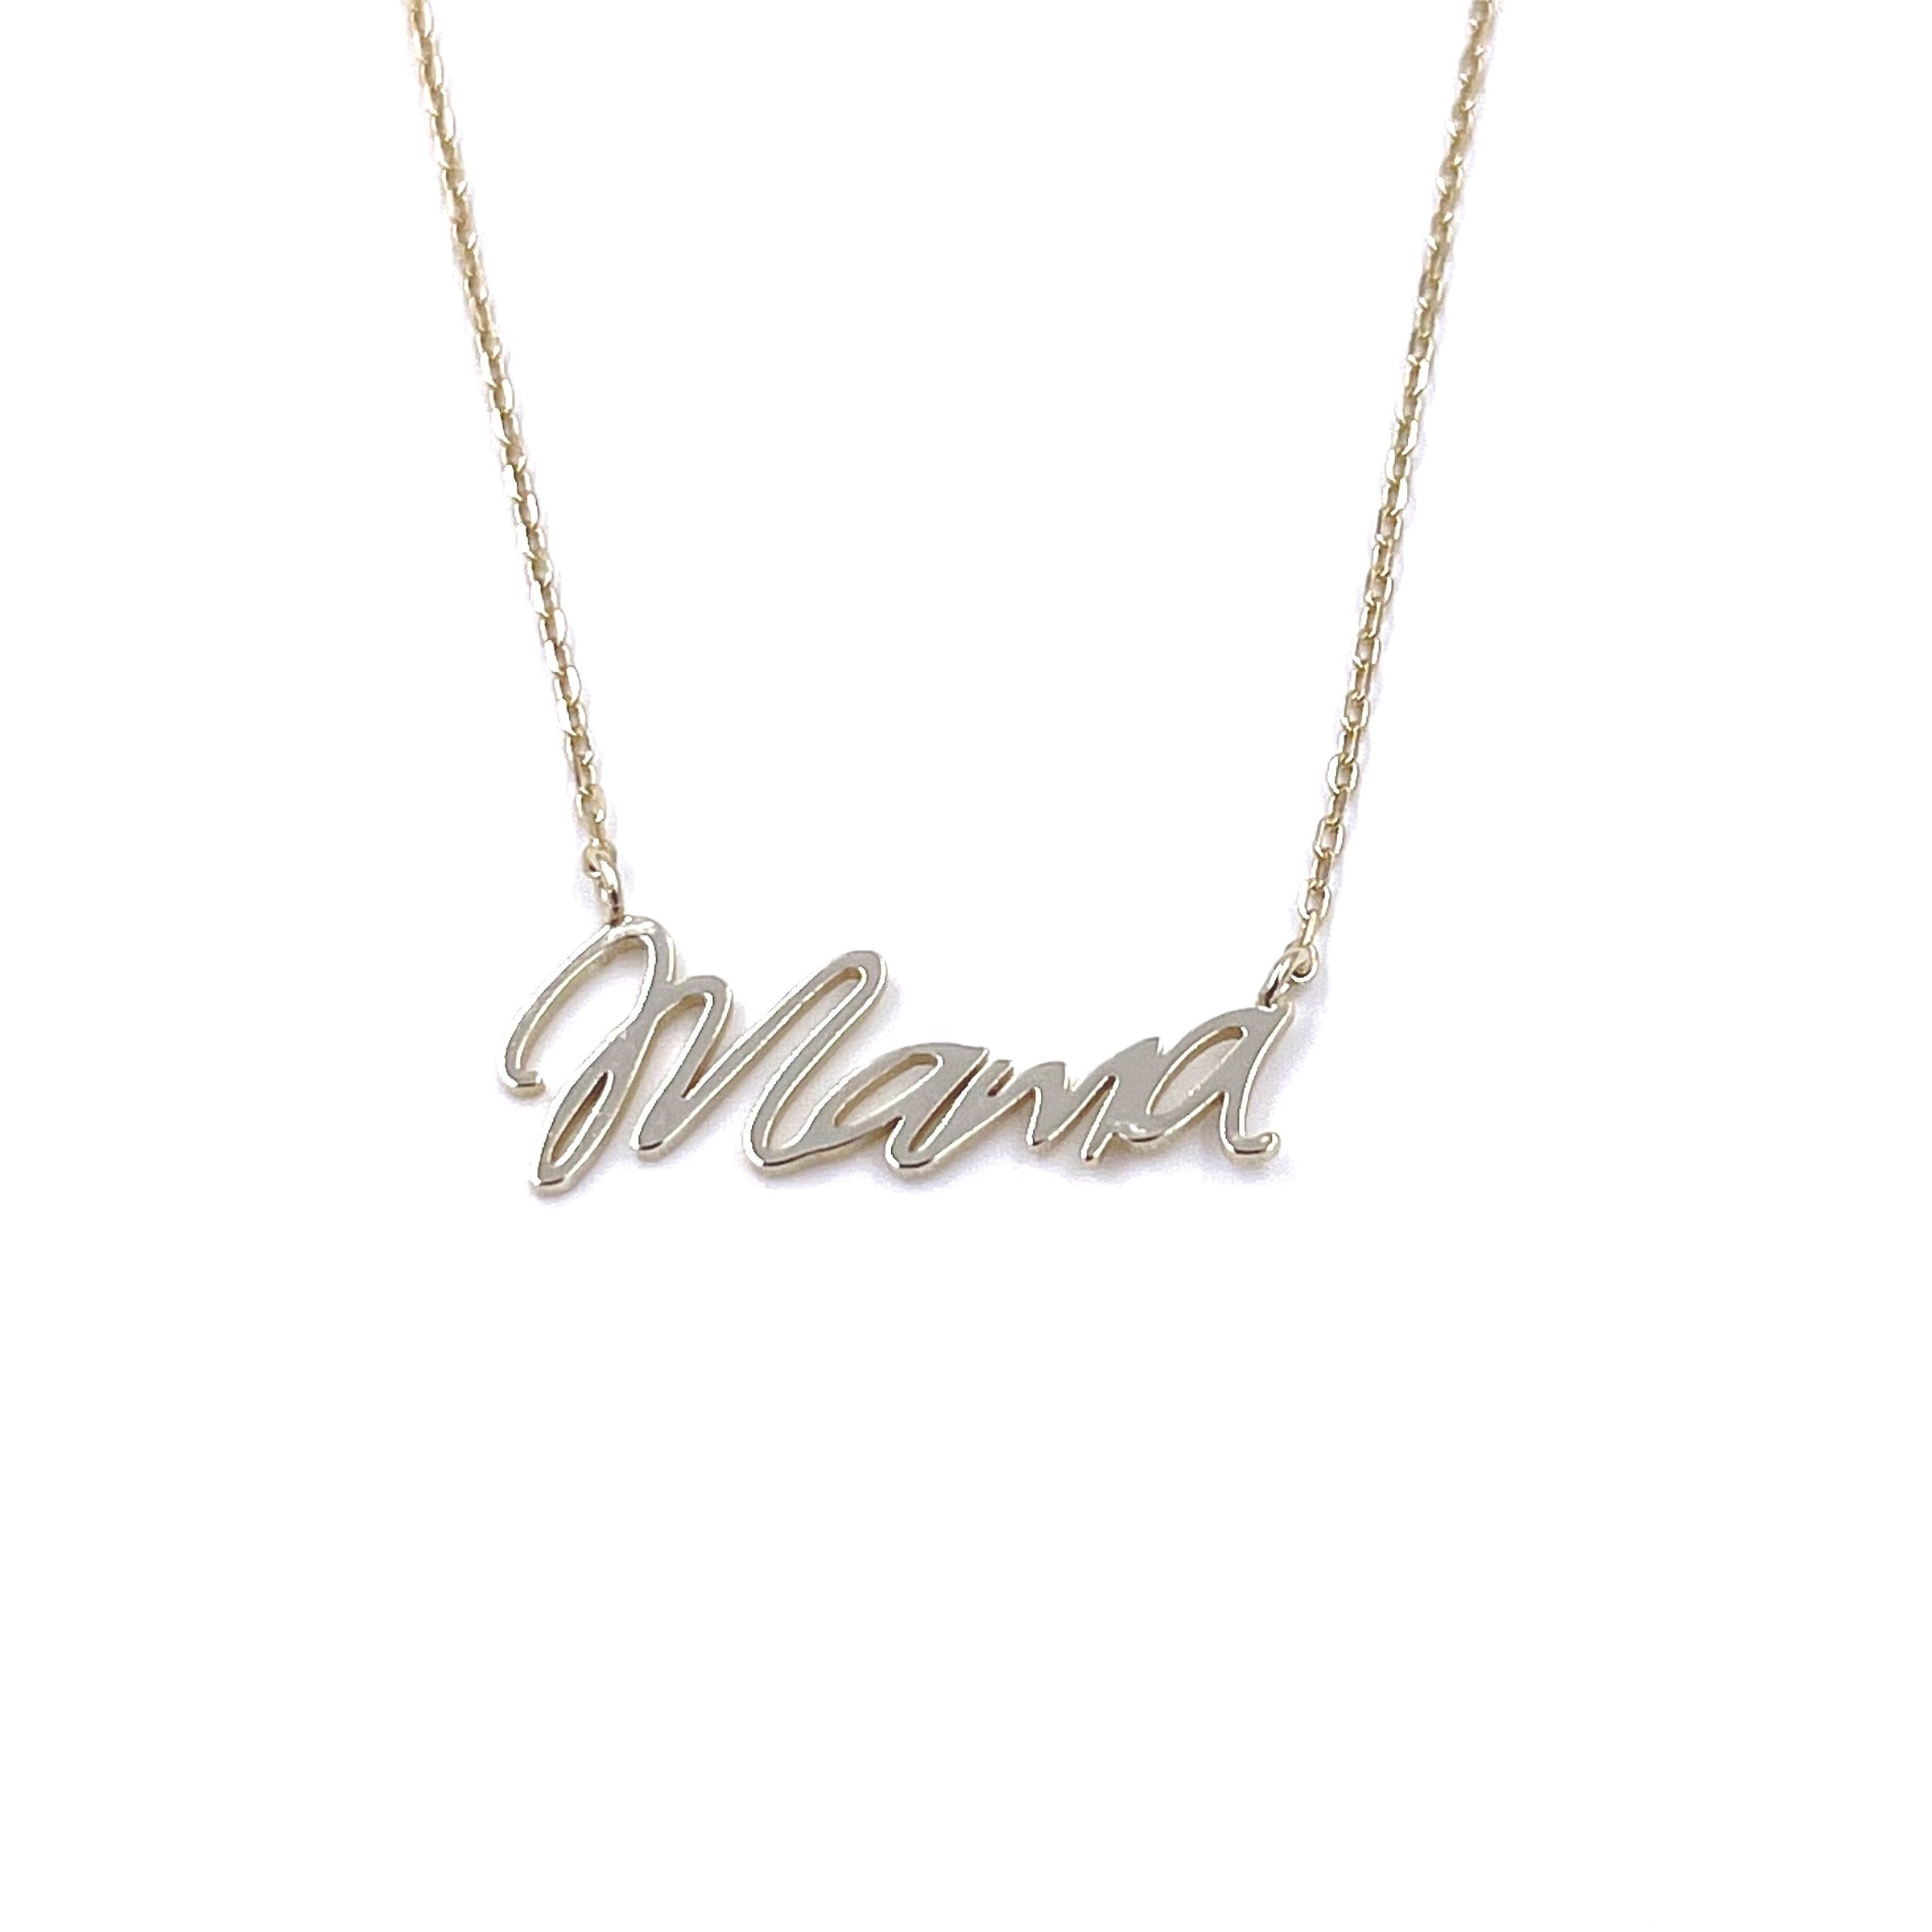 Petite Mom Necklace 14K Yellow Gold 17 Length | Jared